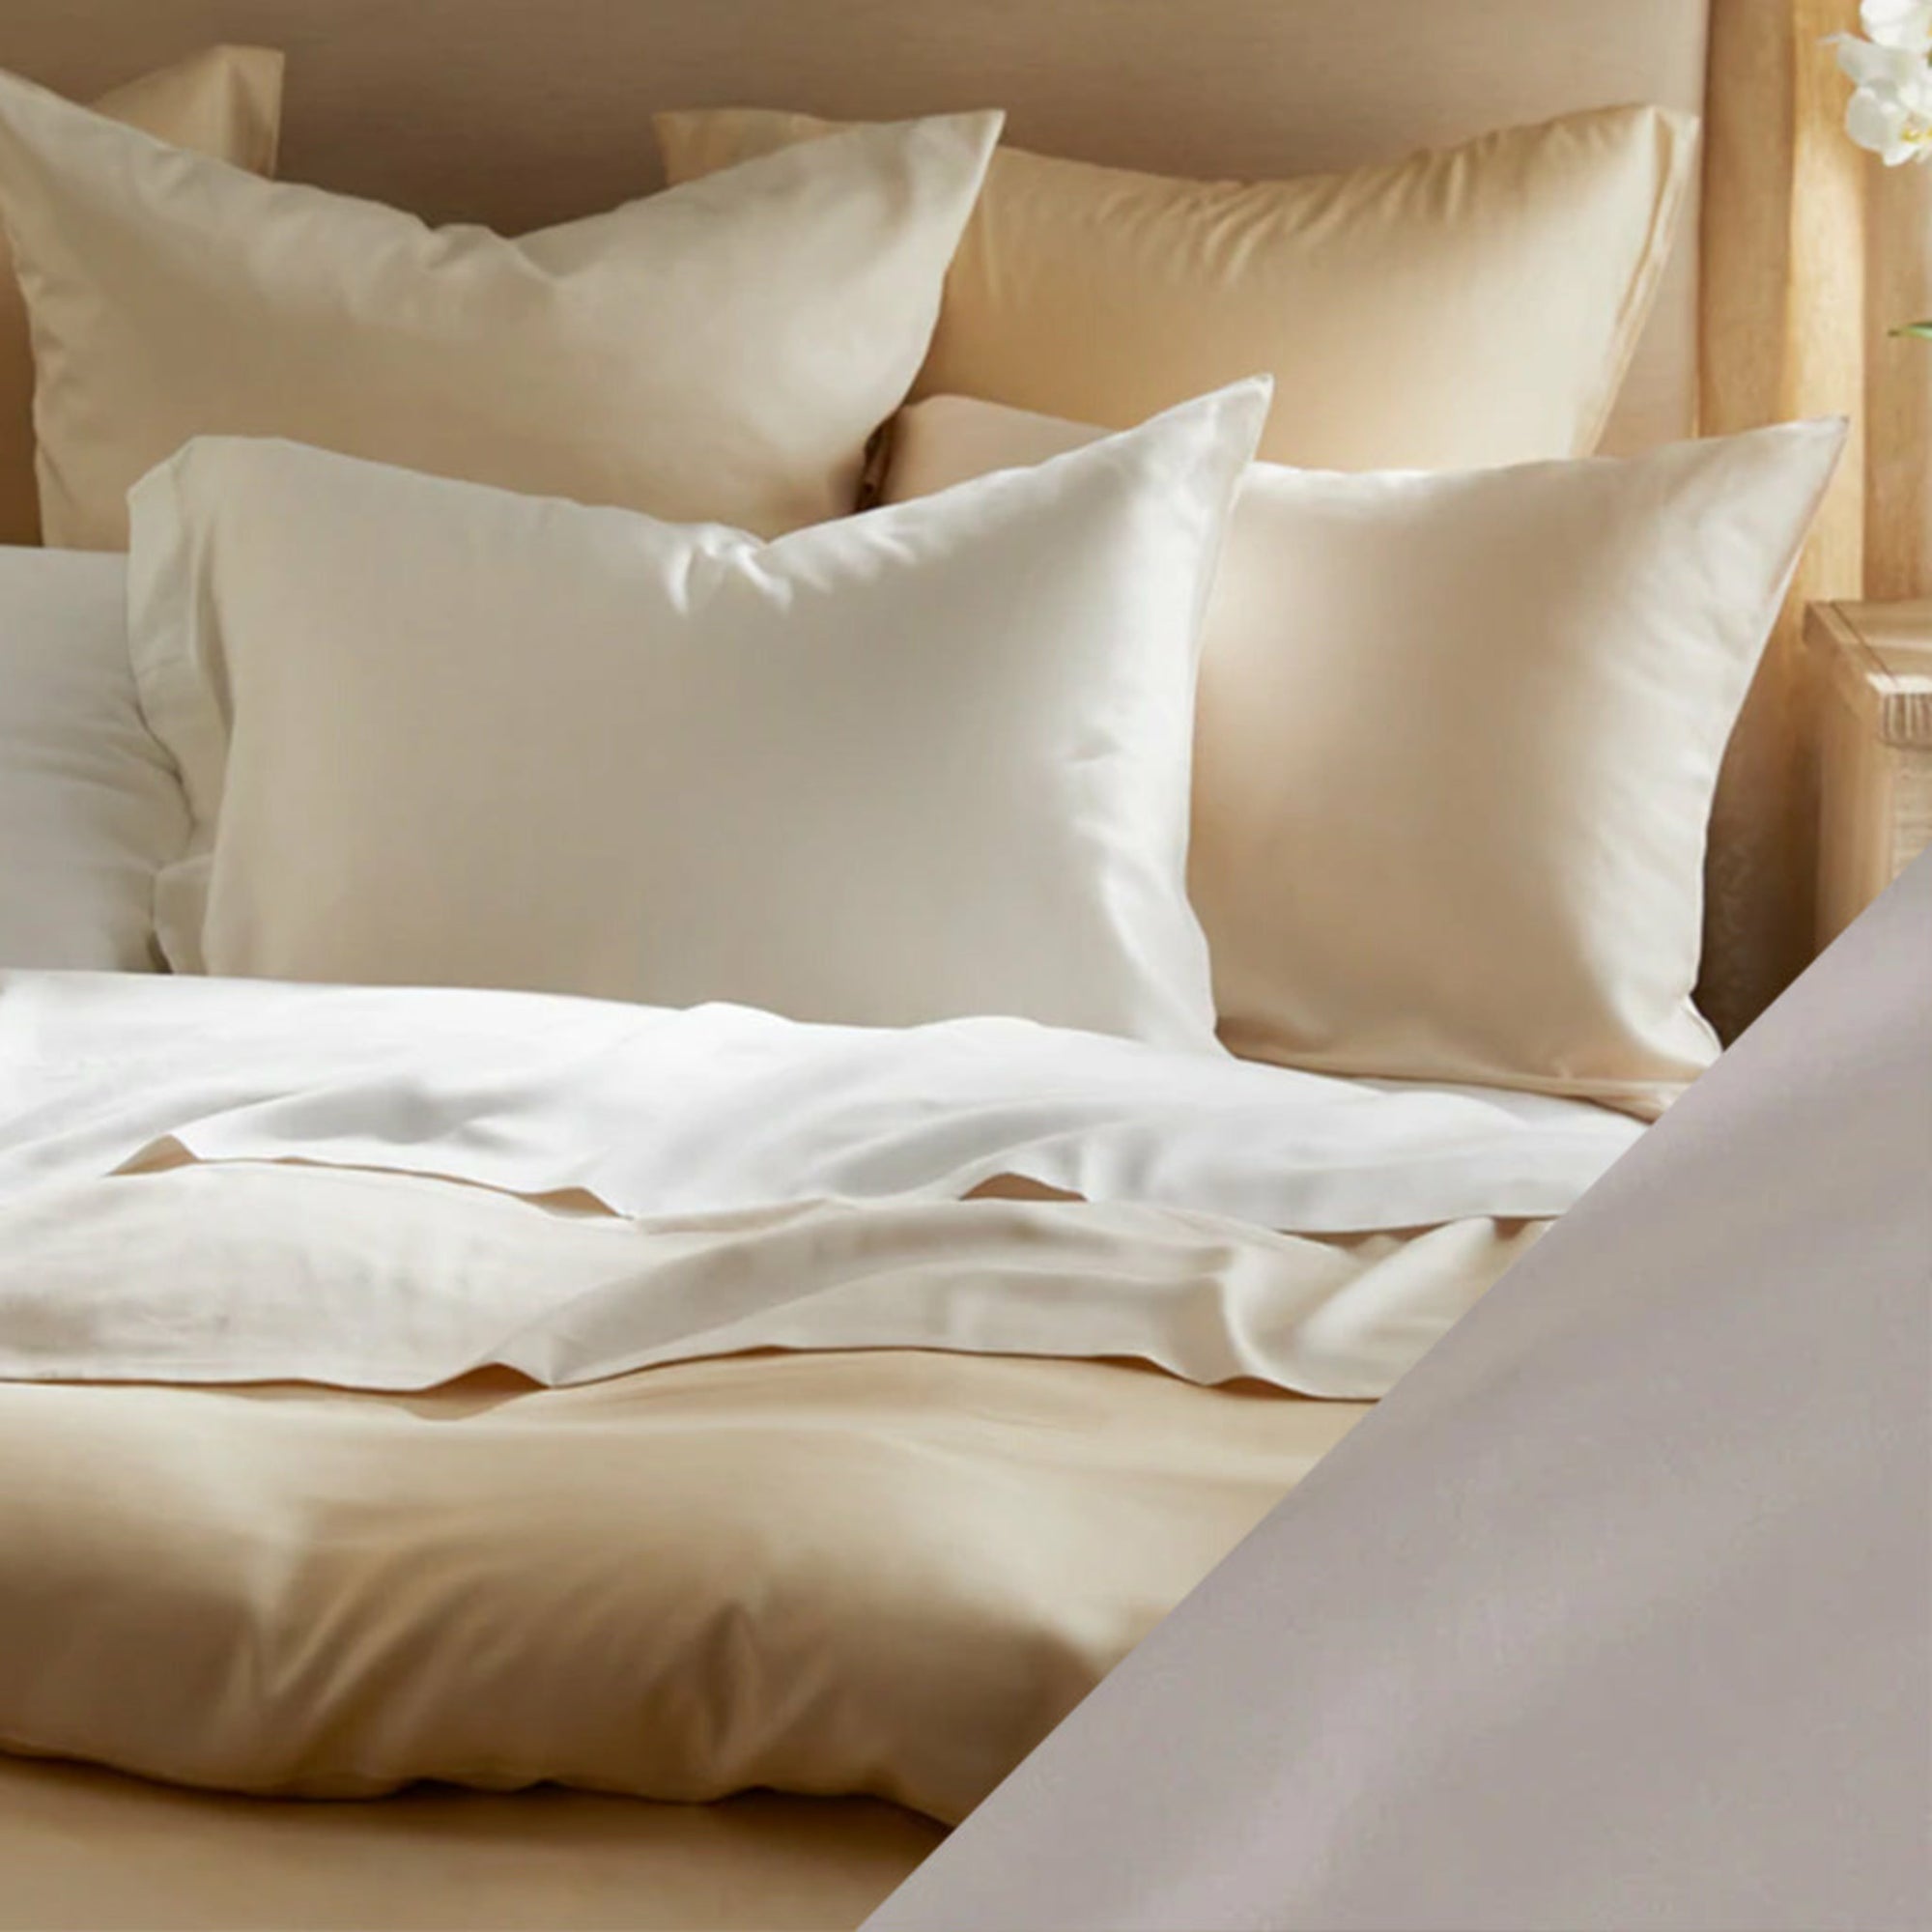 Main Lifestyle of SDH Legna Classic Bedding with Swatch of Cappuccino